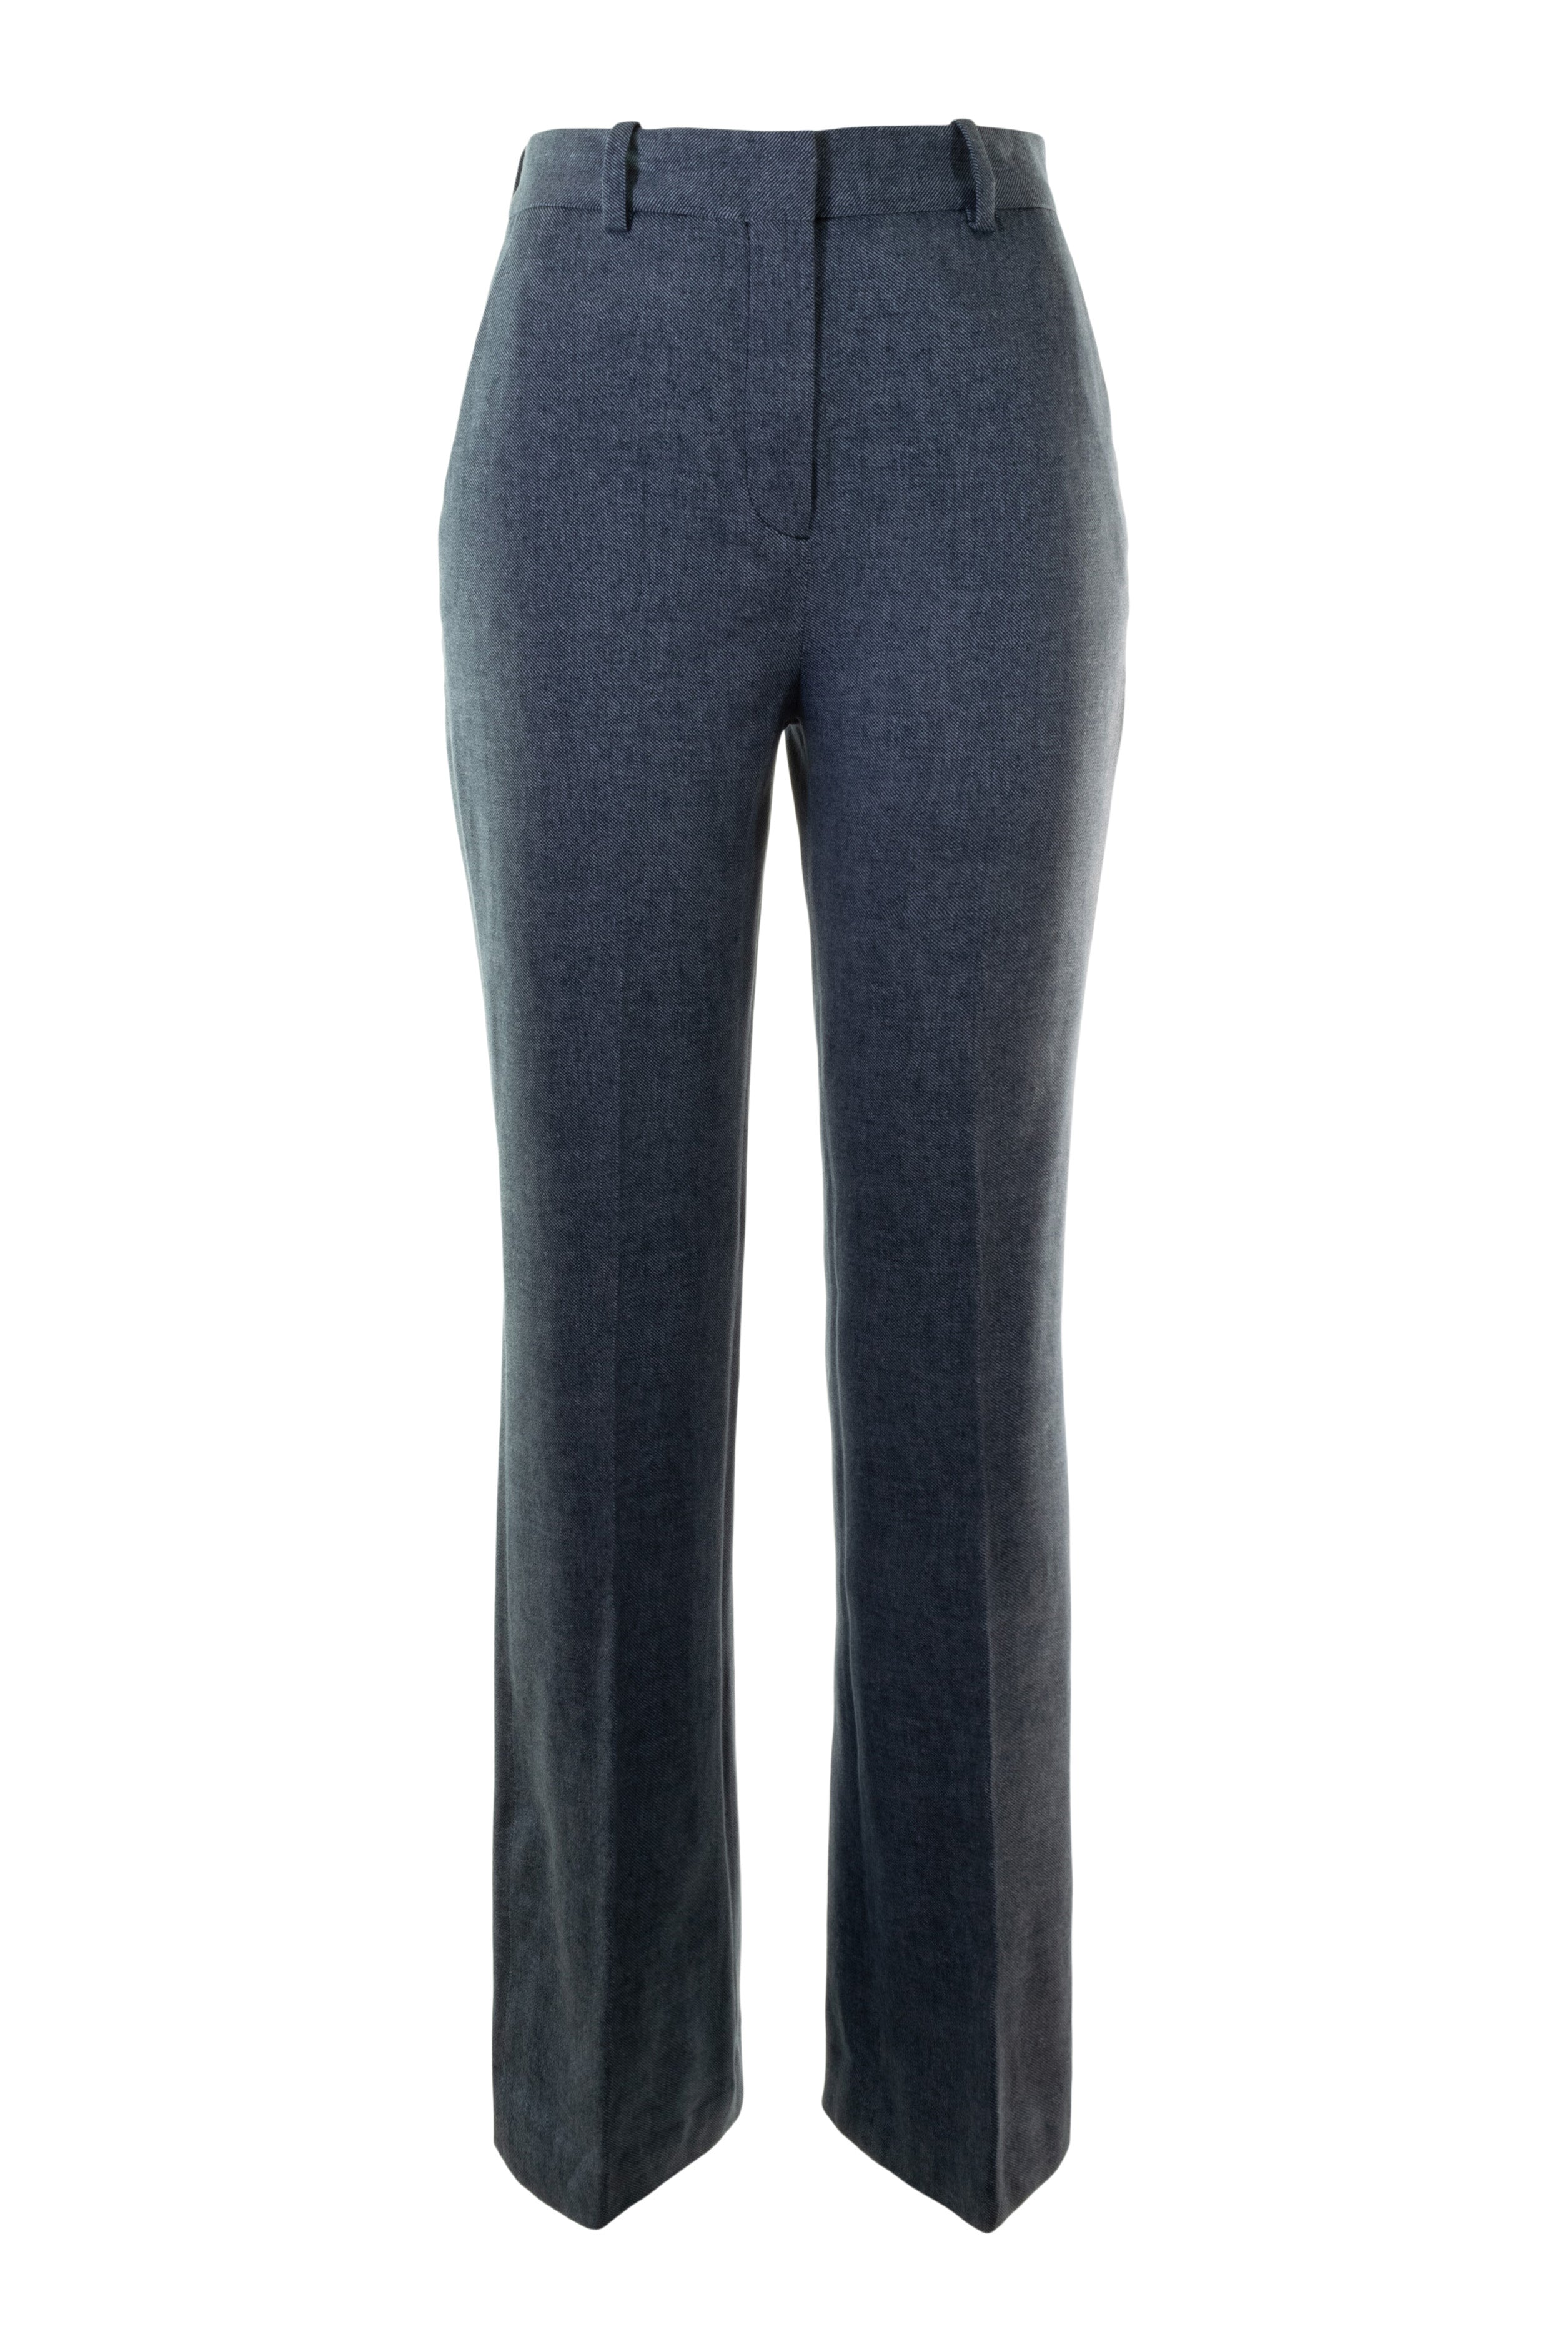 Circolo 1901 Canvas Jersey Pants in Indaco